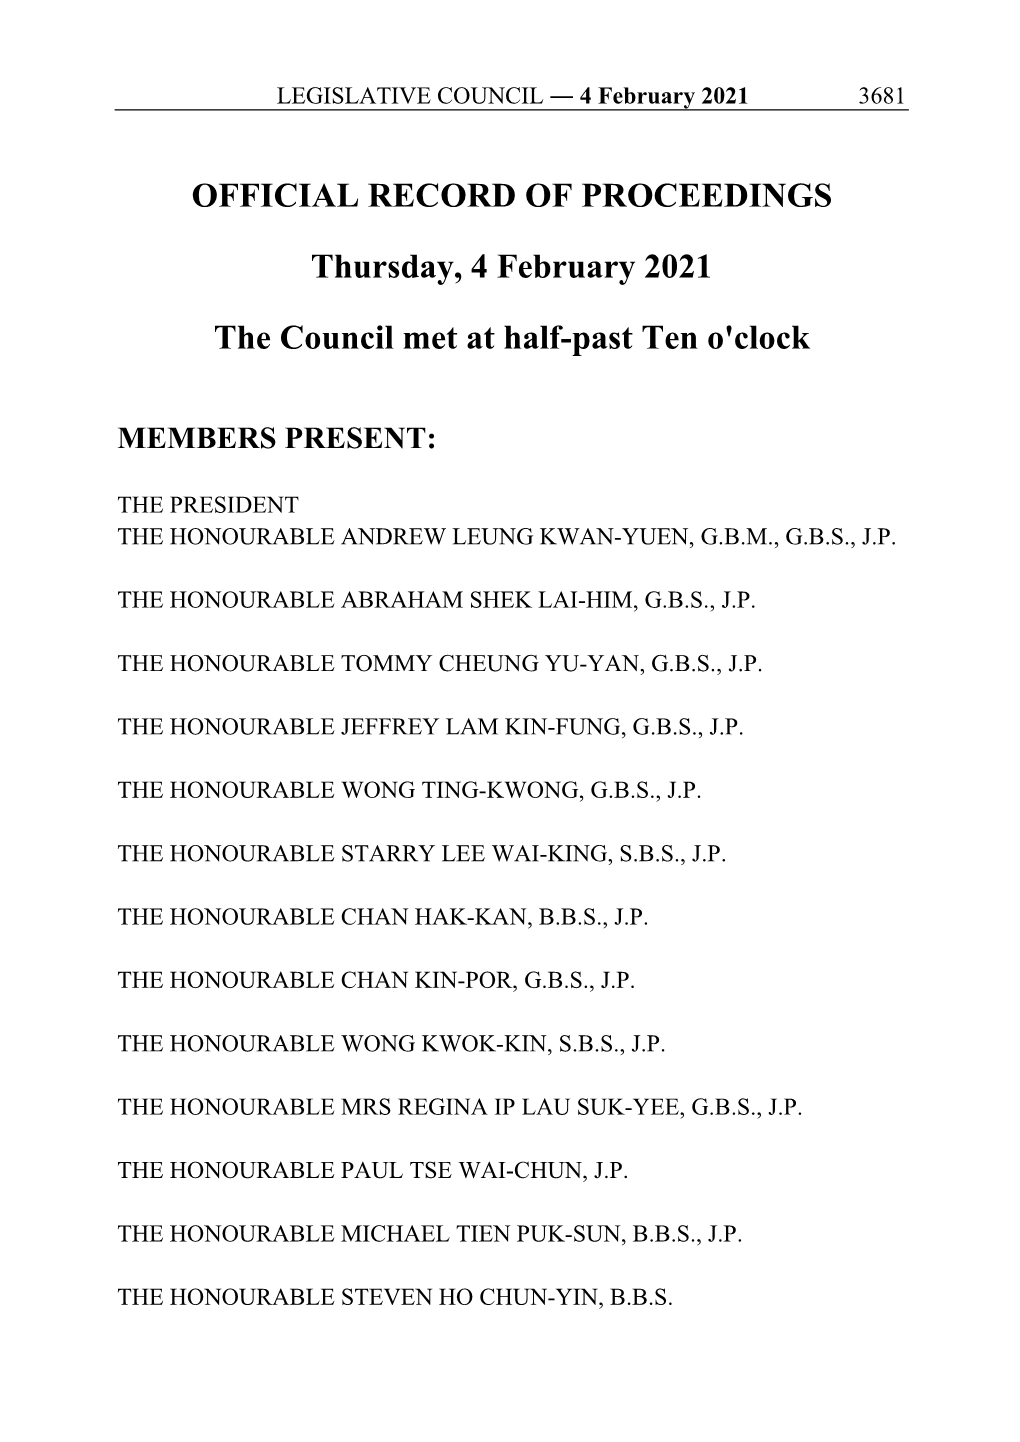 OFFICIAL RECORD of PROCEEDINGS Thursday, 4